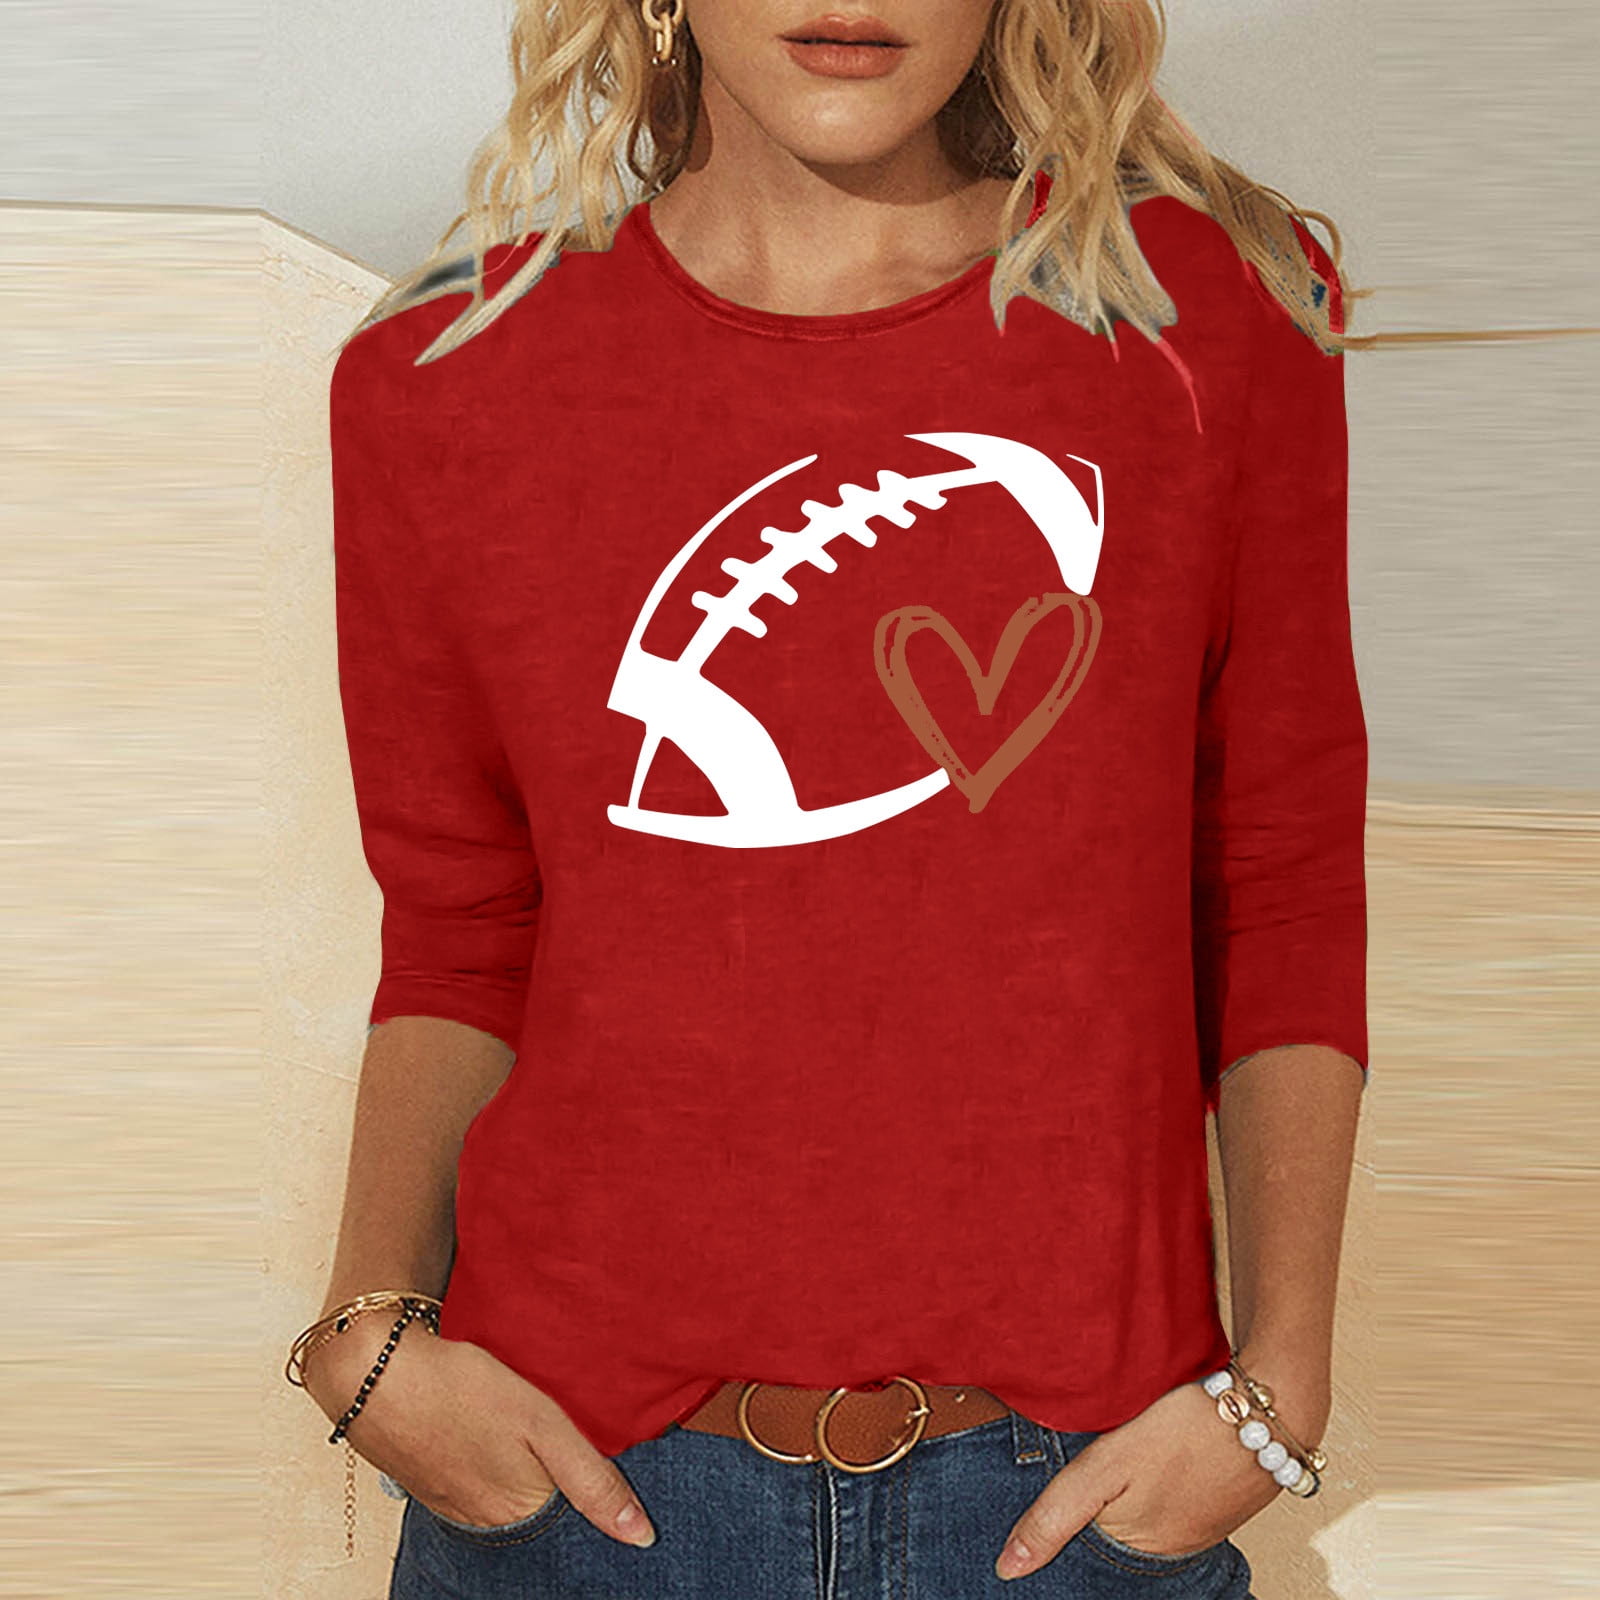 Lastesso Game Day Outfits for Women 3/4 Sleeves Football Shirt Baseball ...